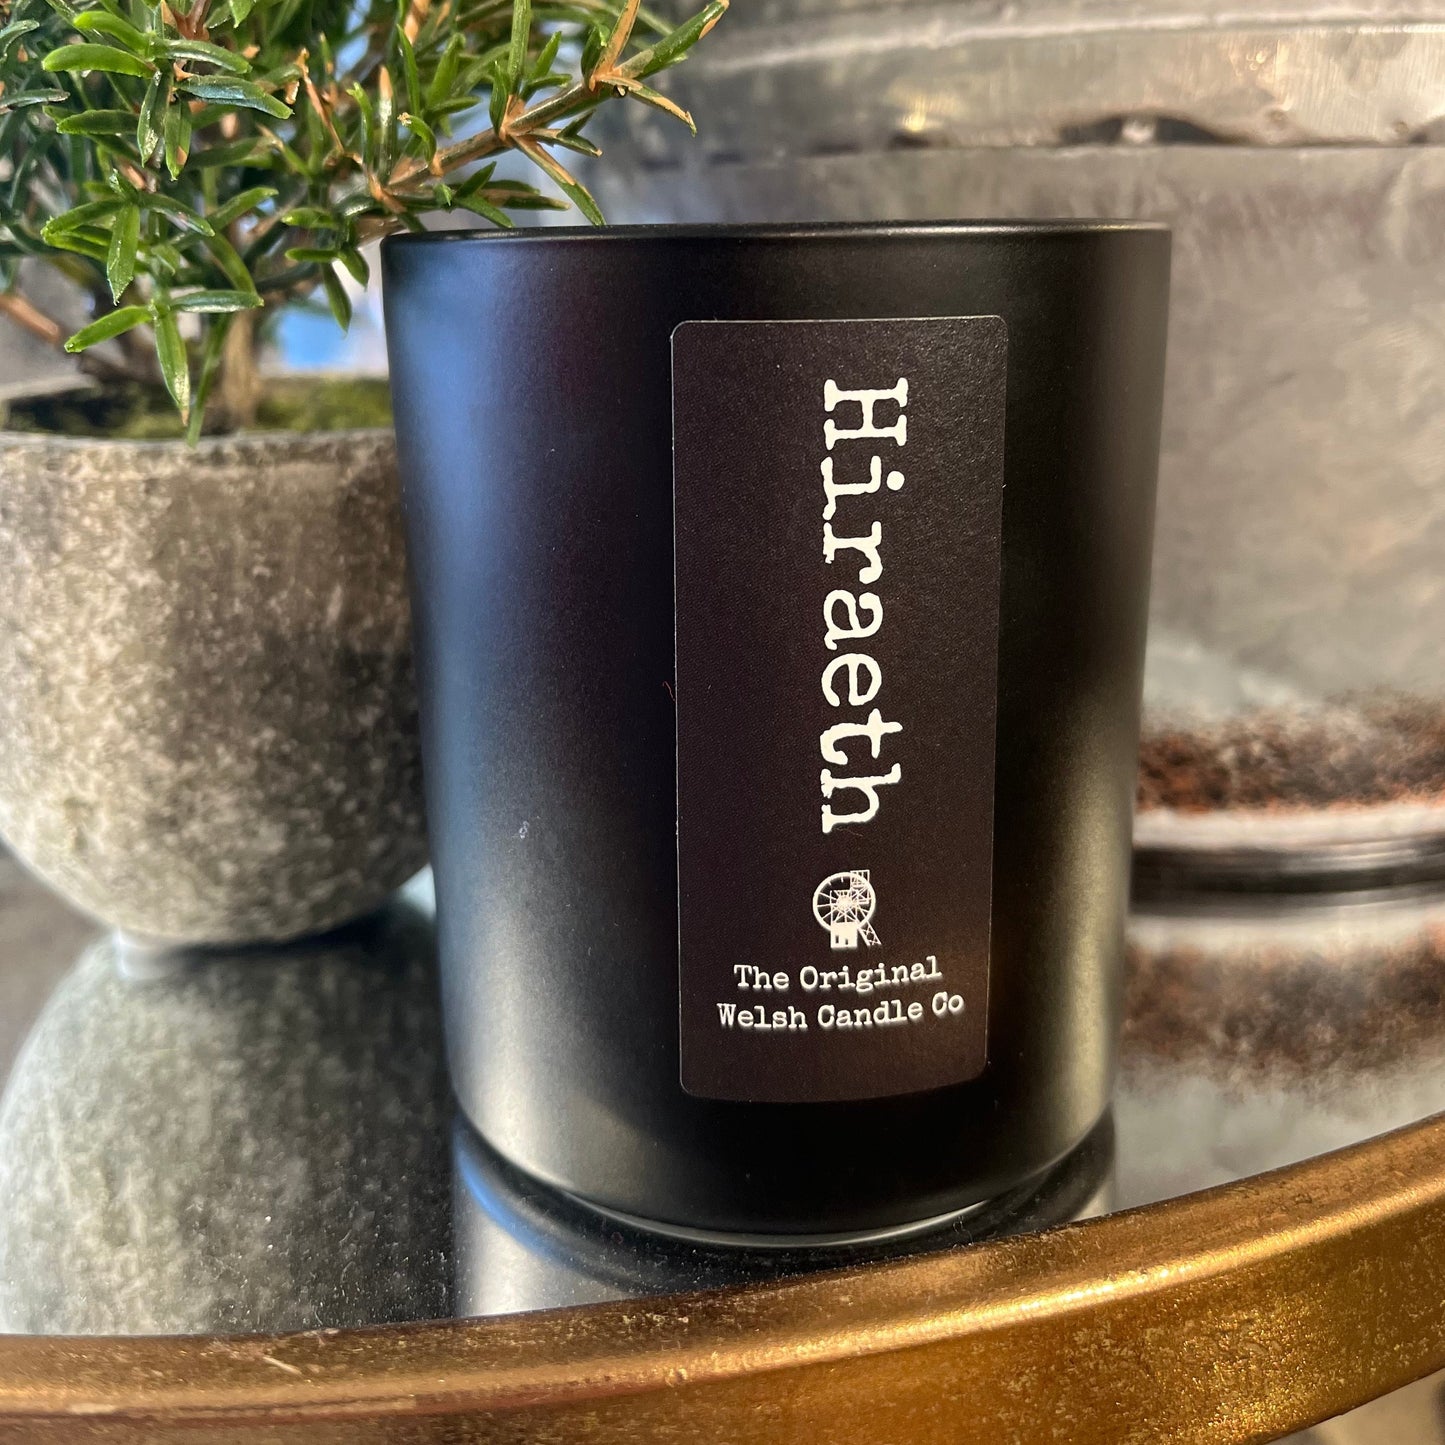 Hiraeth scented glass candle 30cl fragranced with Cedarwood & Patchouli